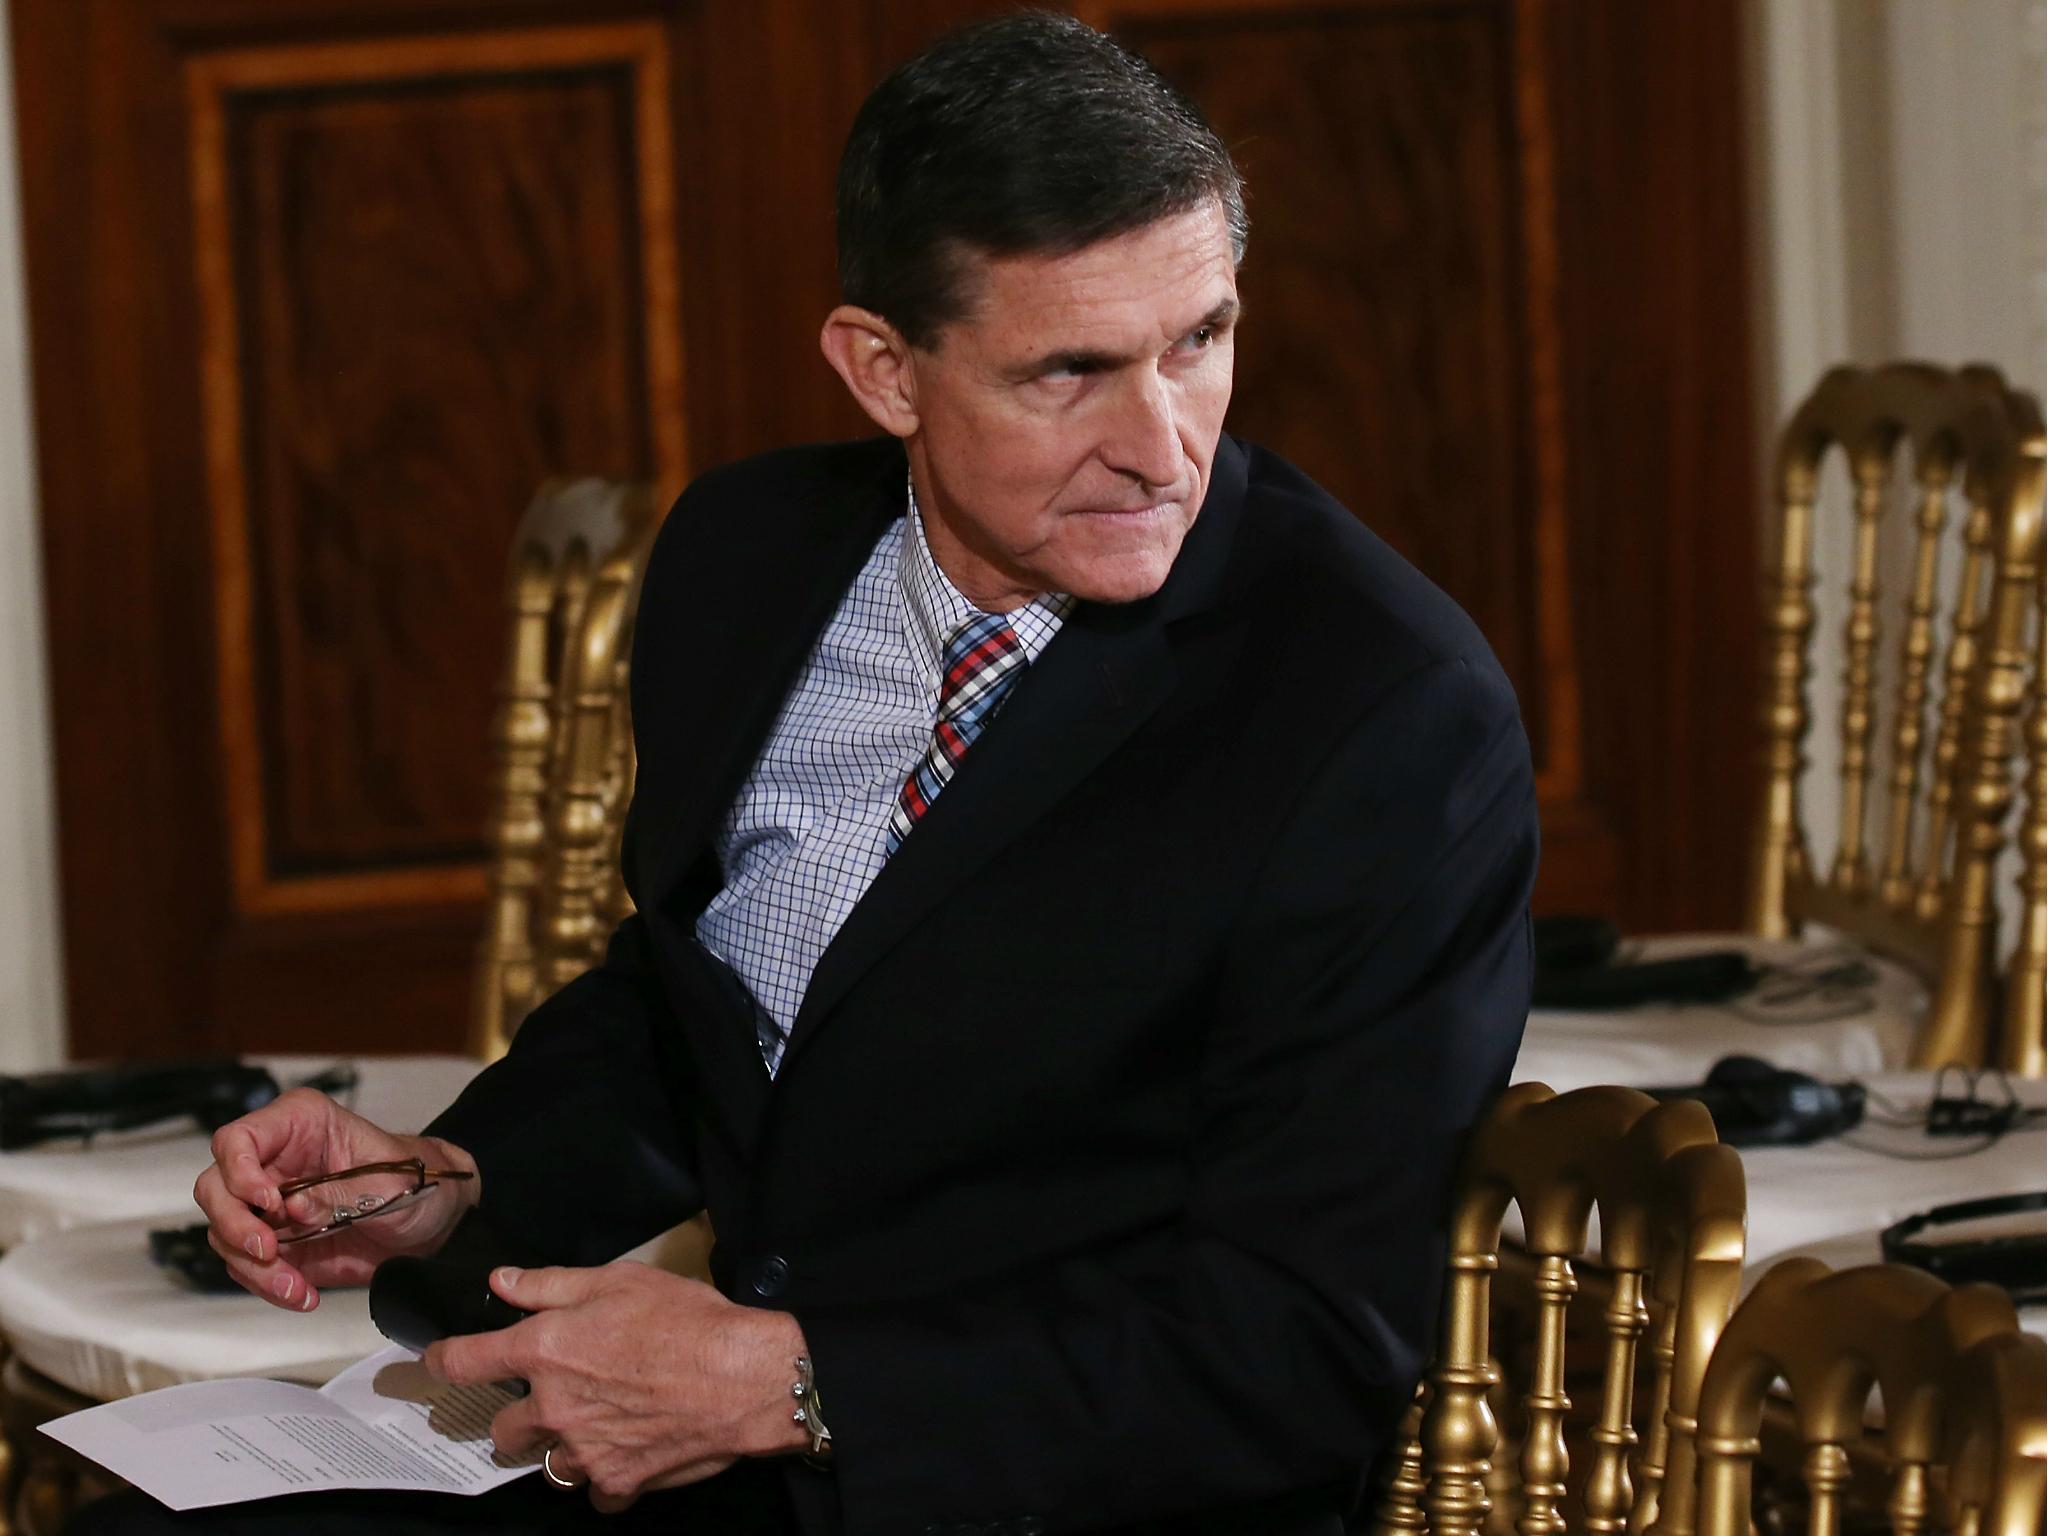 Former National Security Adviser Michael Flynn has pleaded guilty to charges of lying to the FBI.